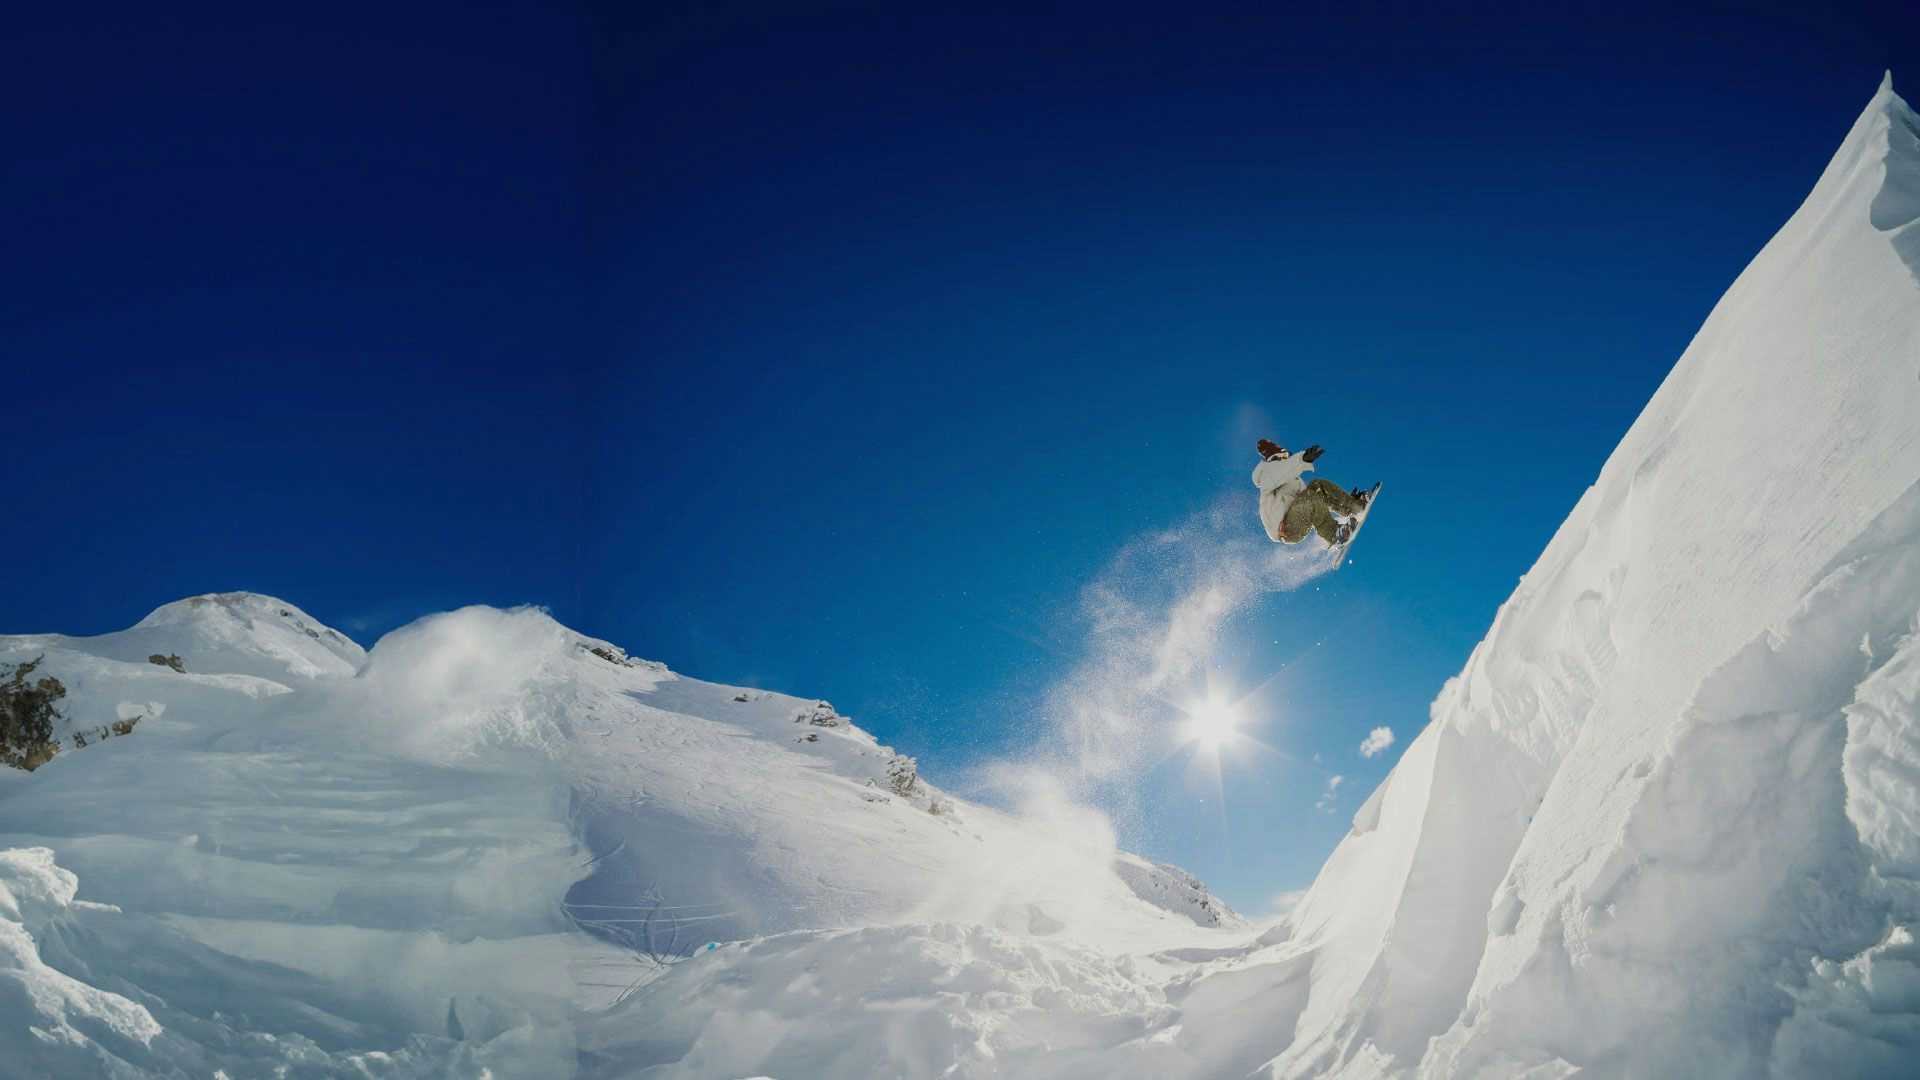 Person doing a jump on a snowboard in New Zealand